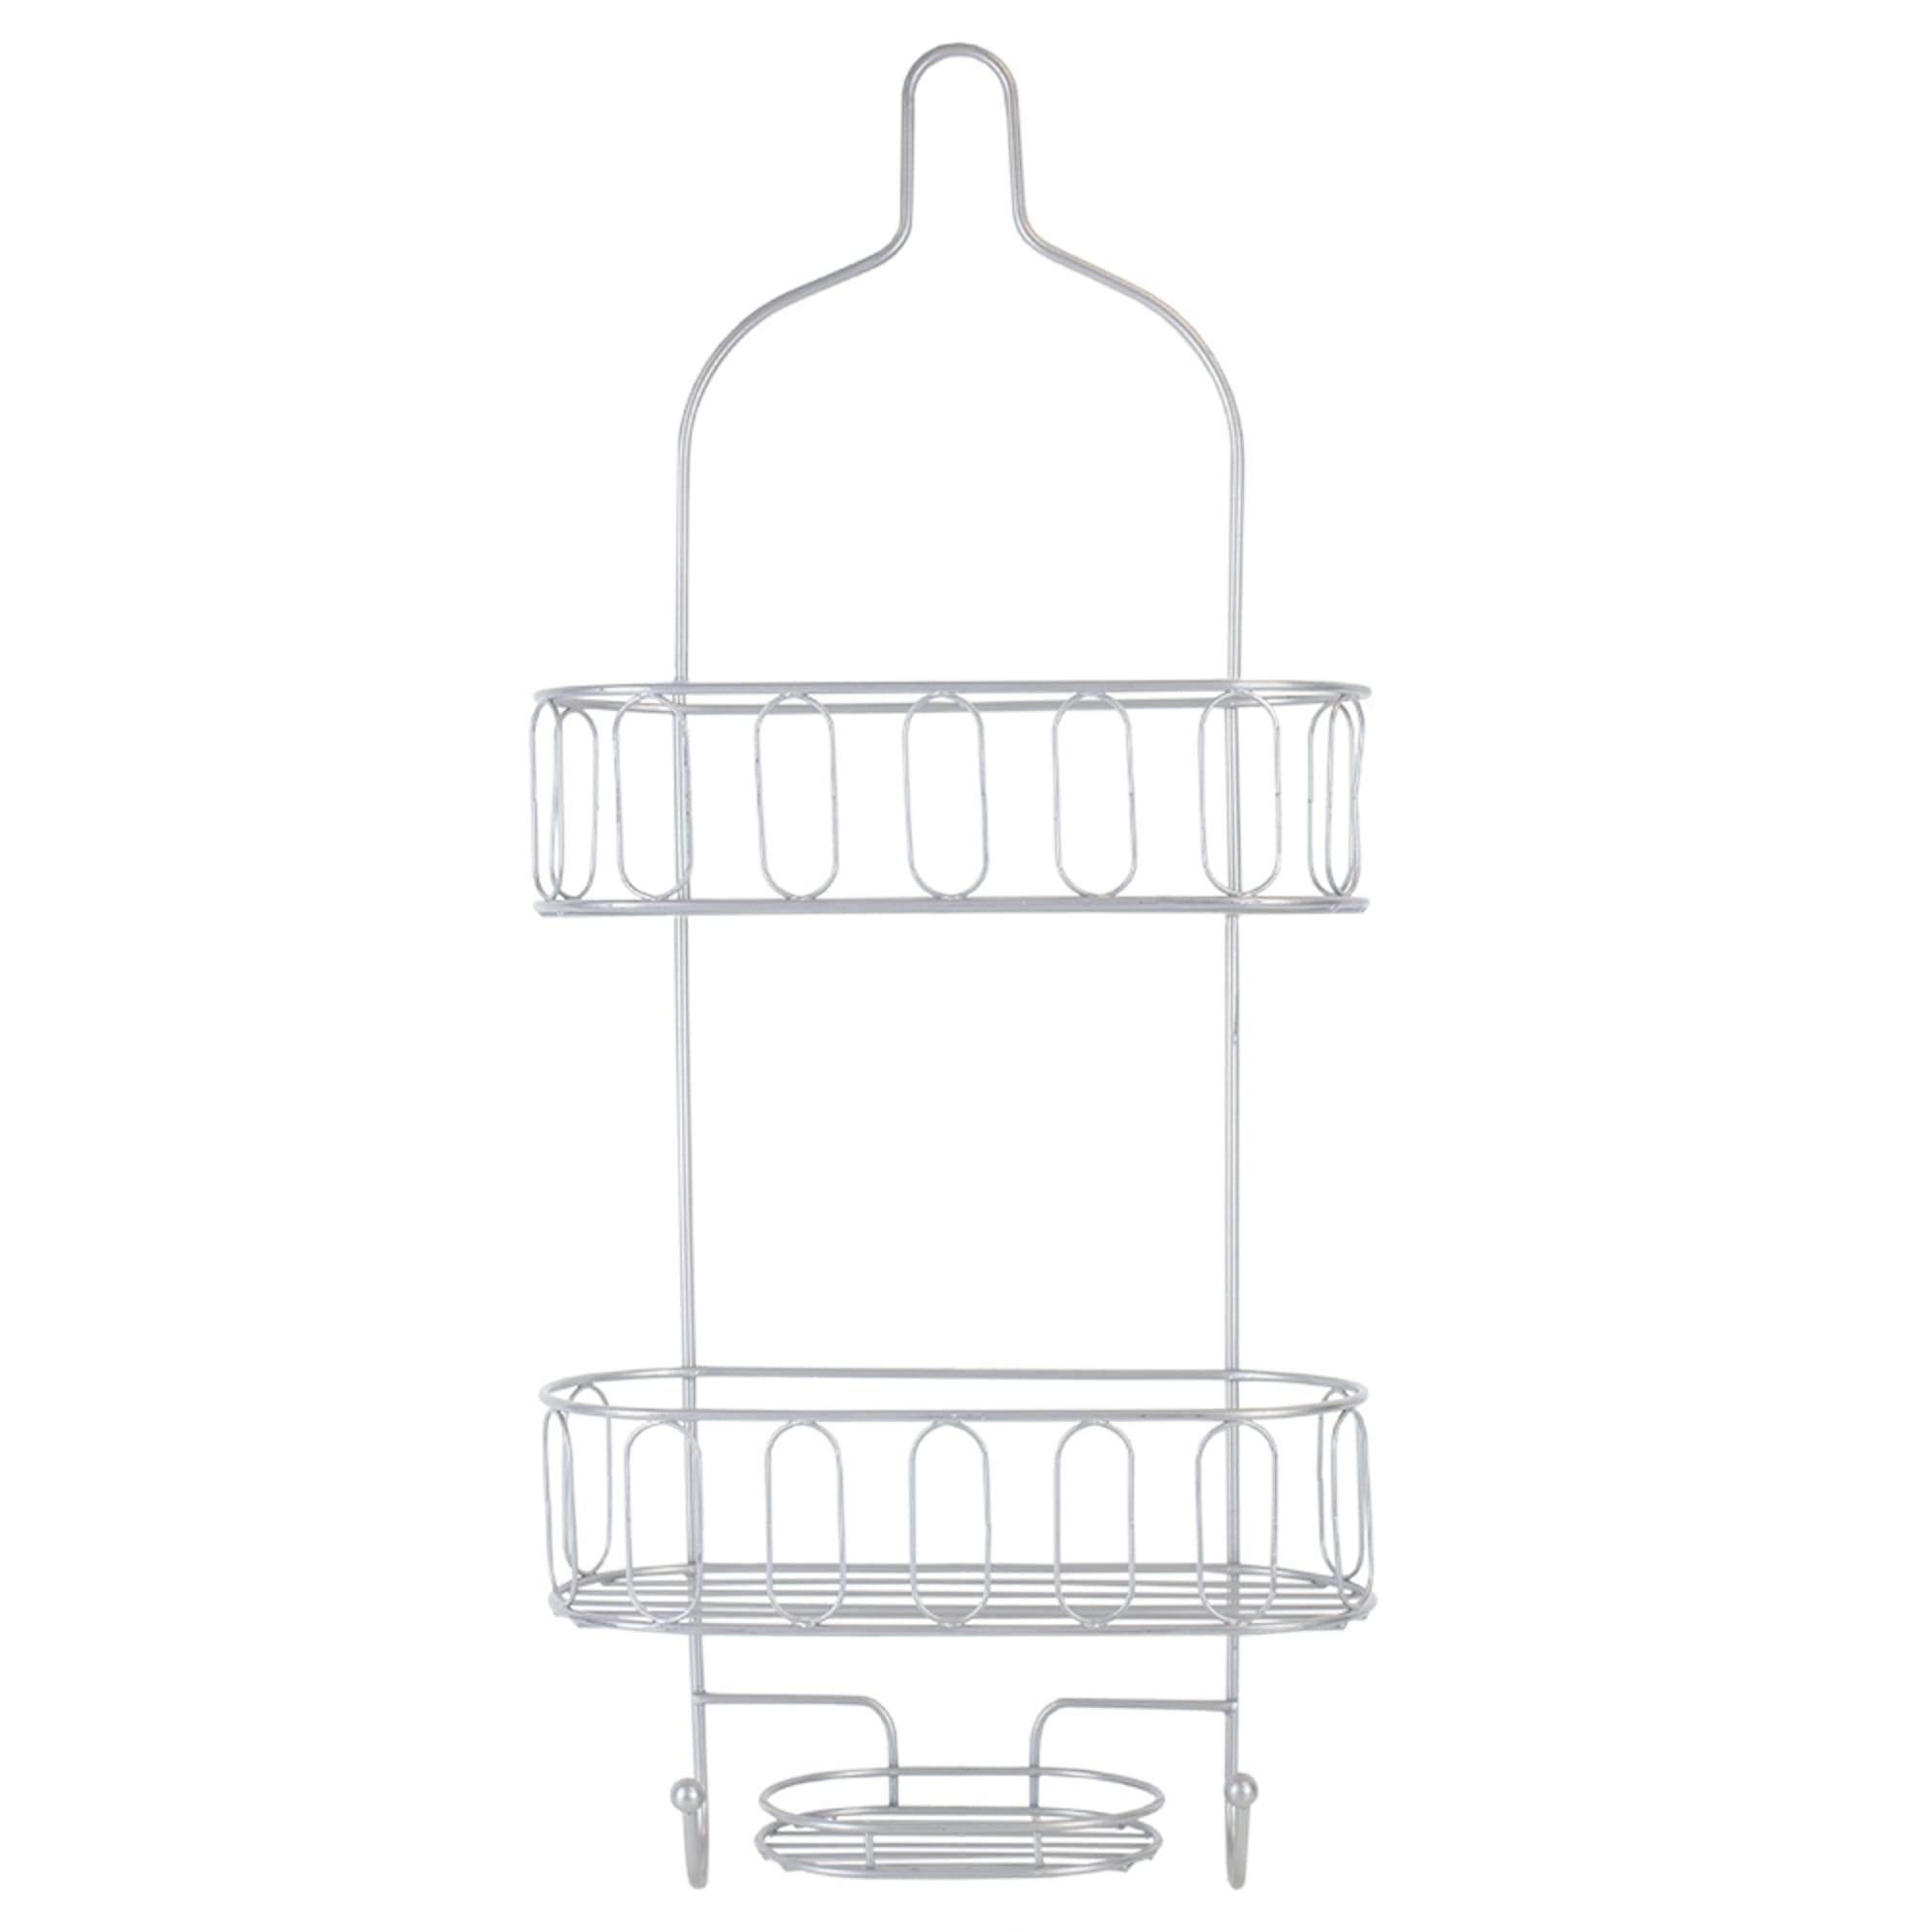 Home Basics Unity 2 Tier Shower Caddy with Bottom Hooks and Center Soap Dish Tray $15.00 EACH, CASE PACK OF 12